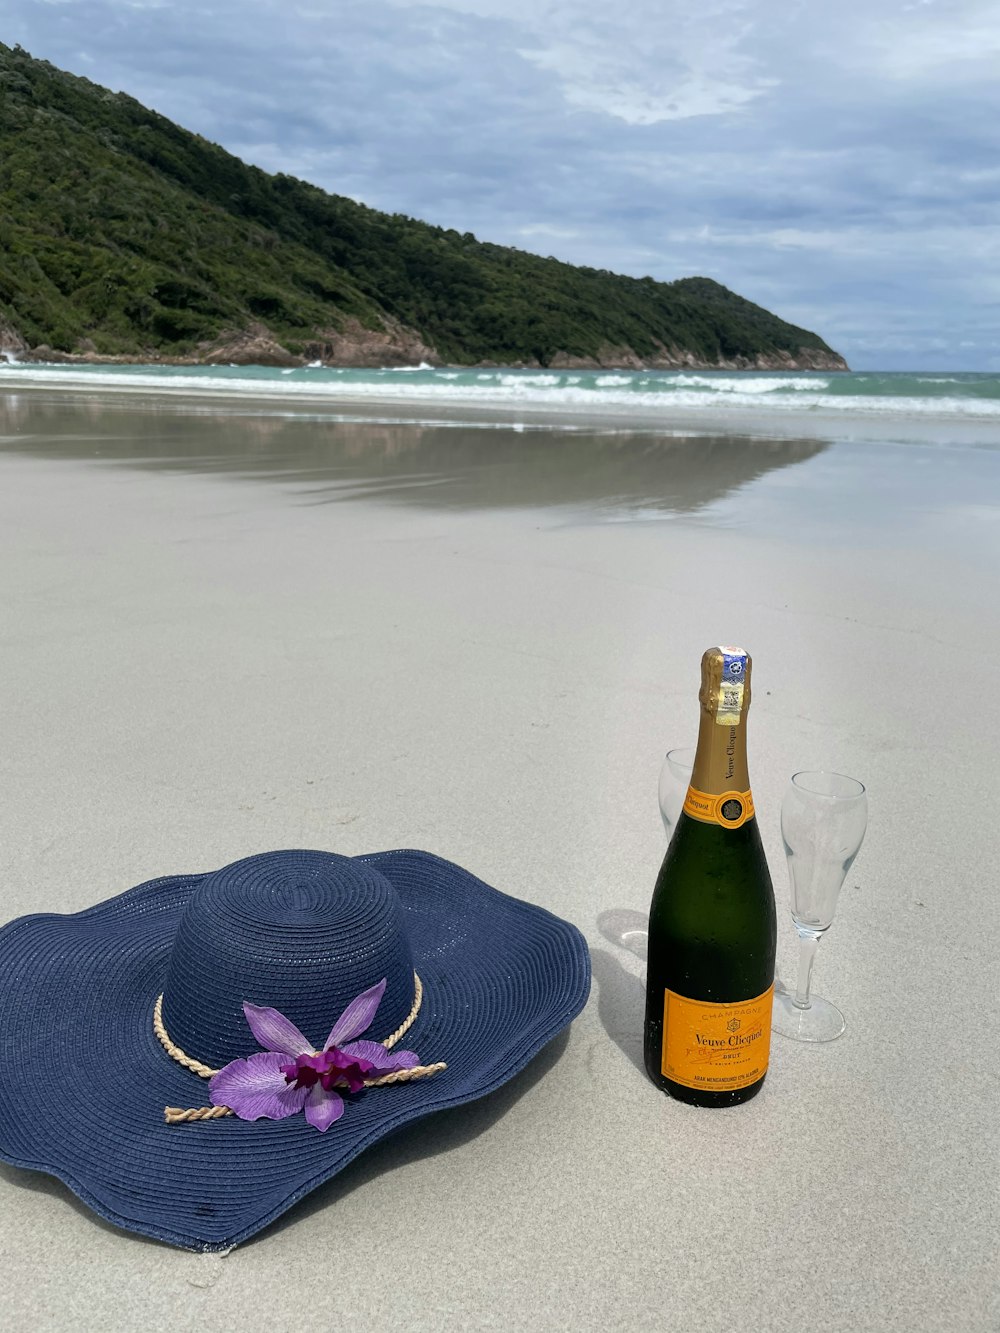 a bottle of wine and a hat on a beach